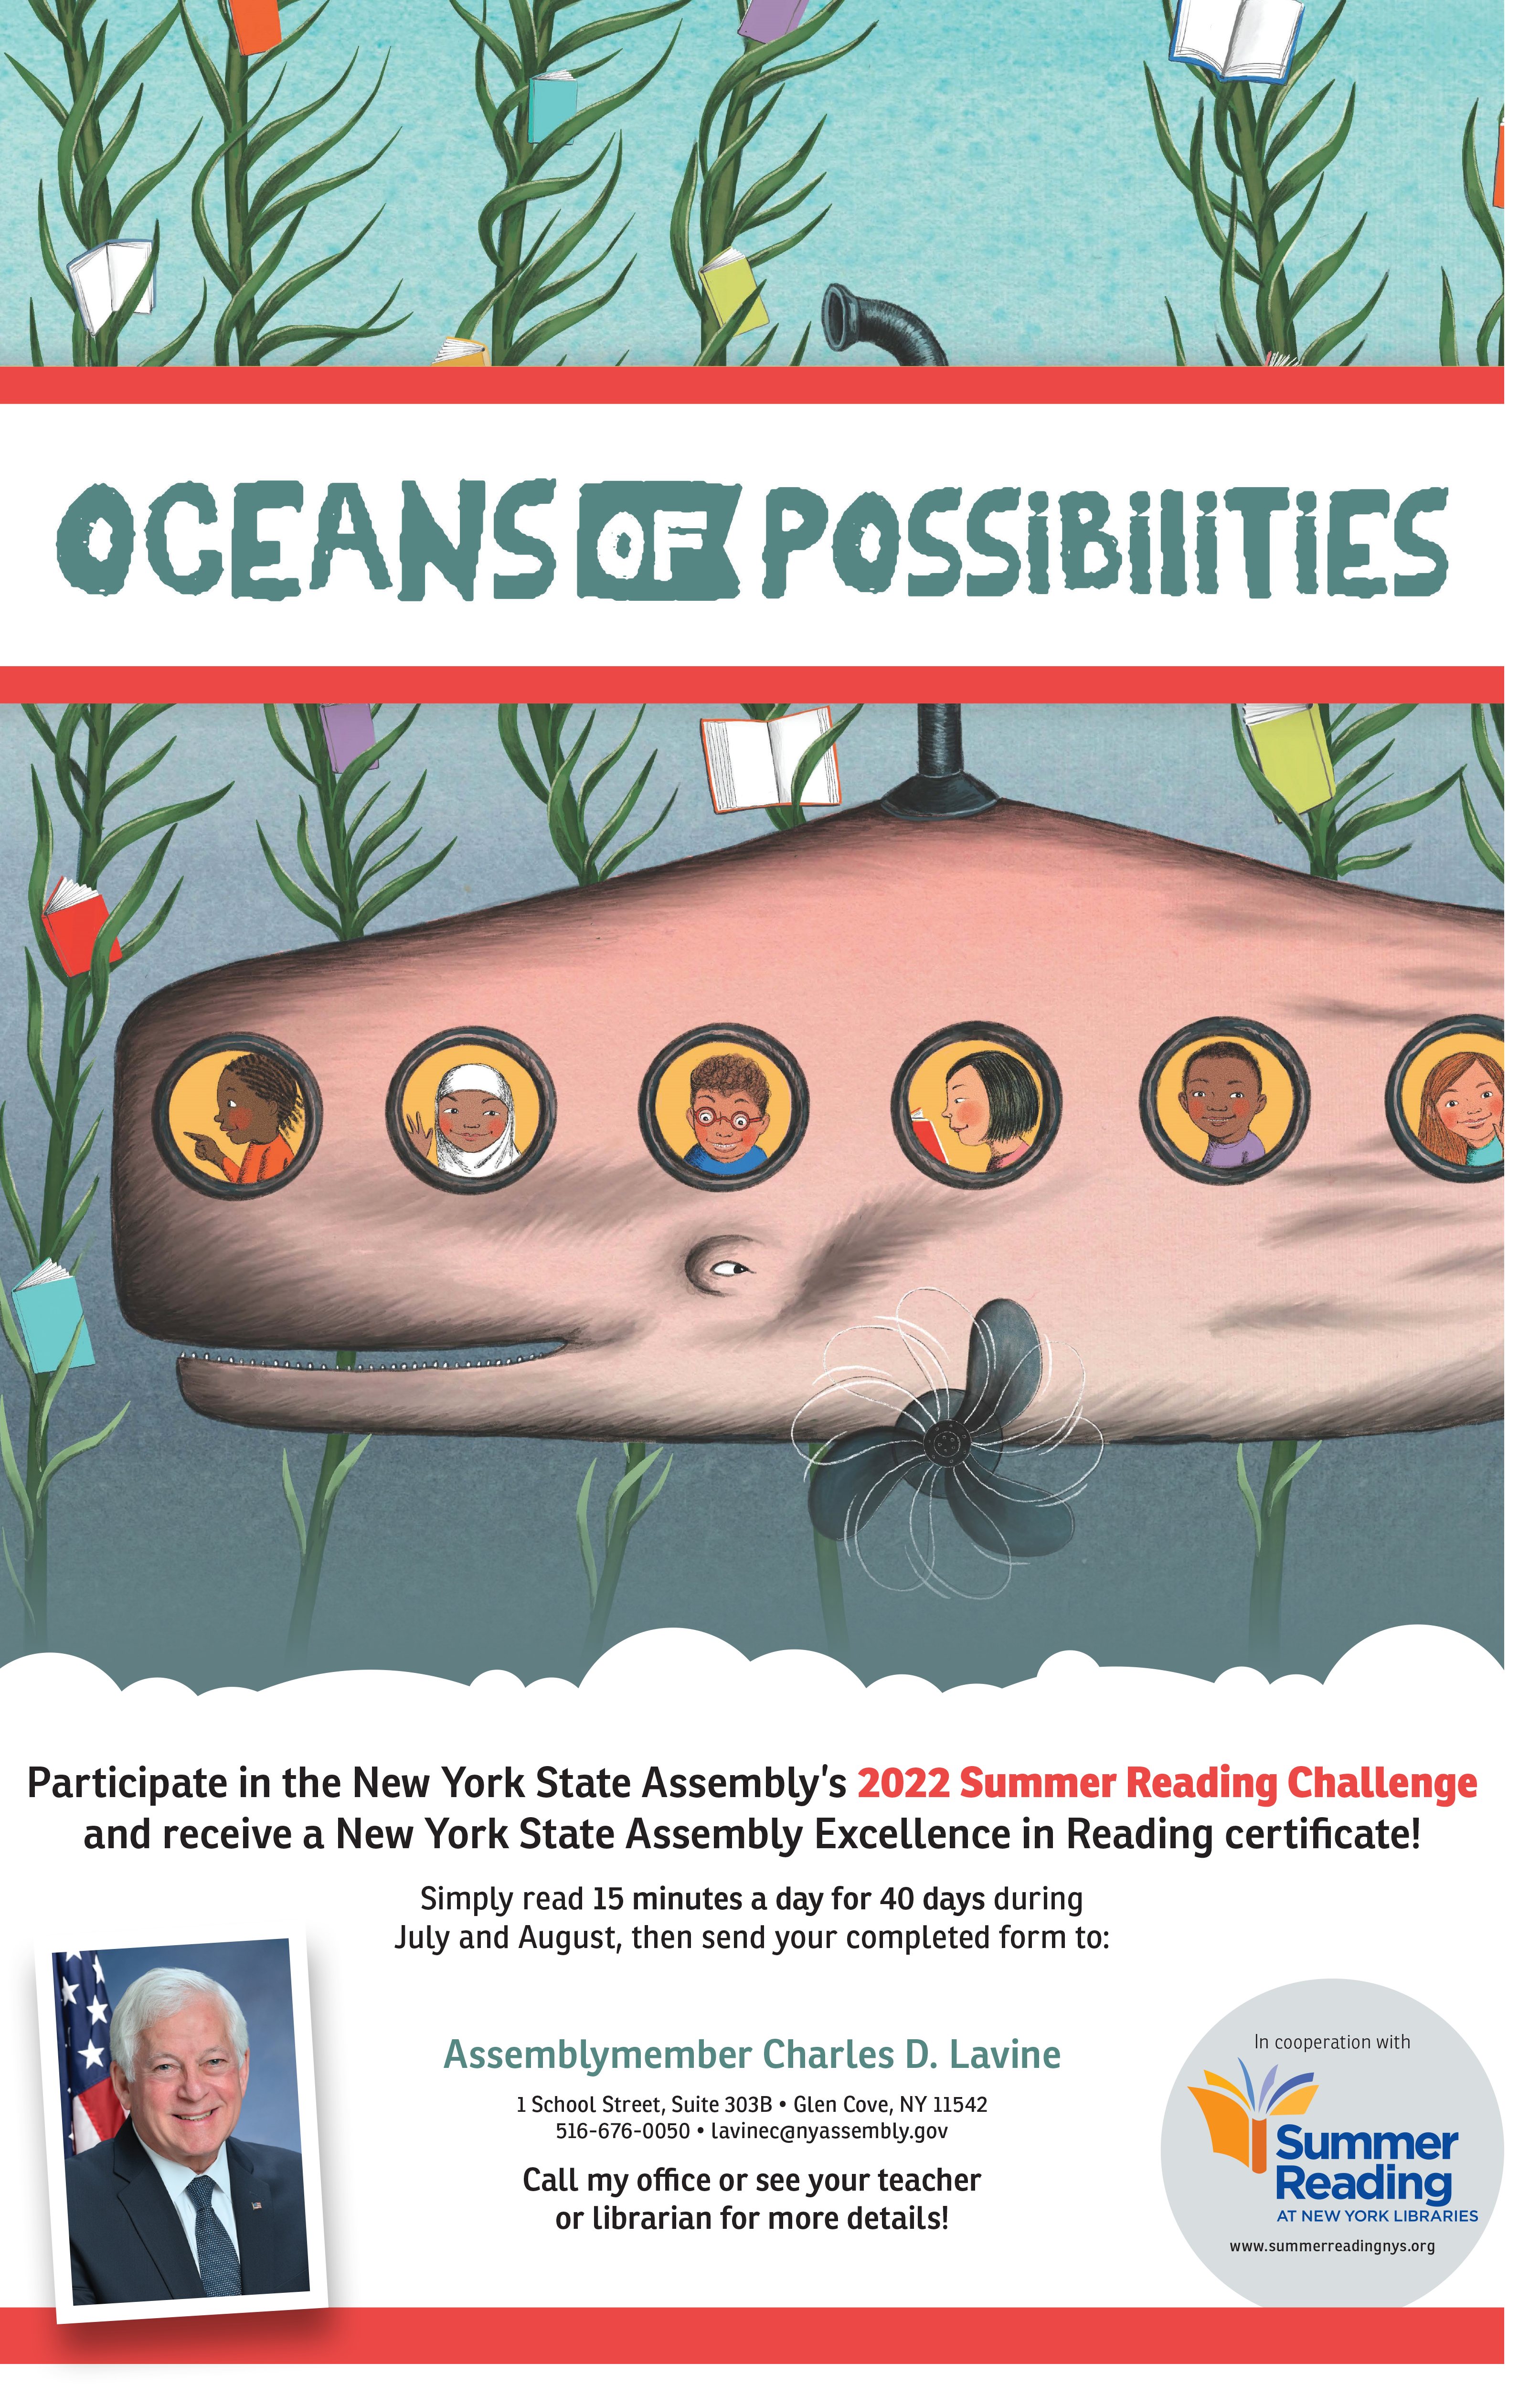 2022 NYS Assembly Summer Reading Challenge - Oceans of Possibilities